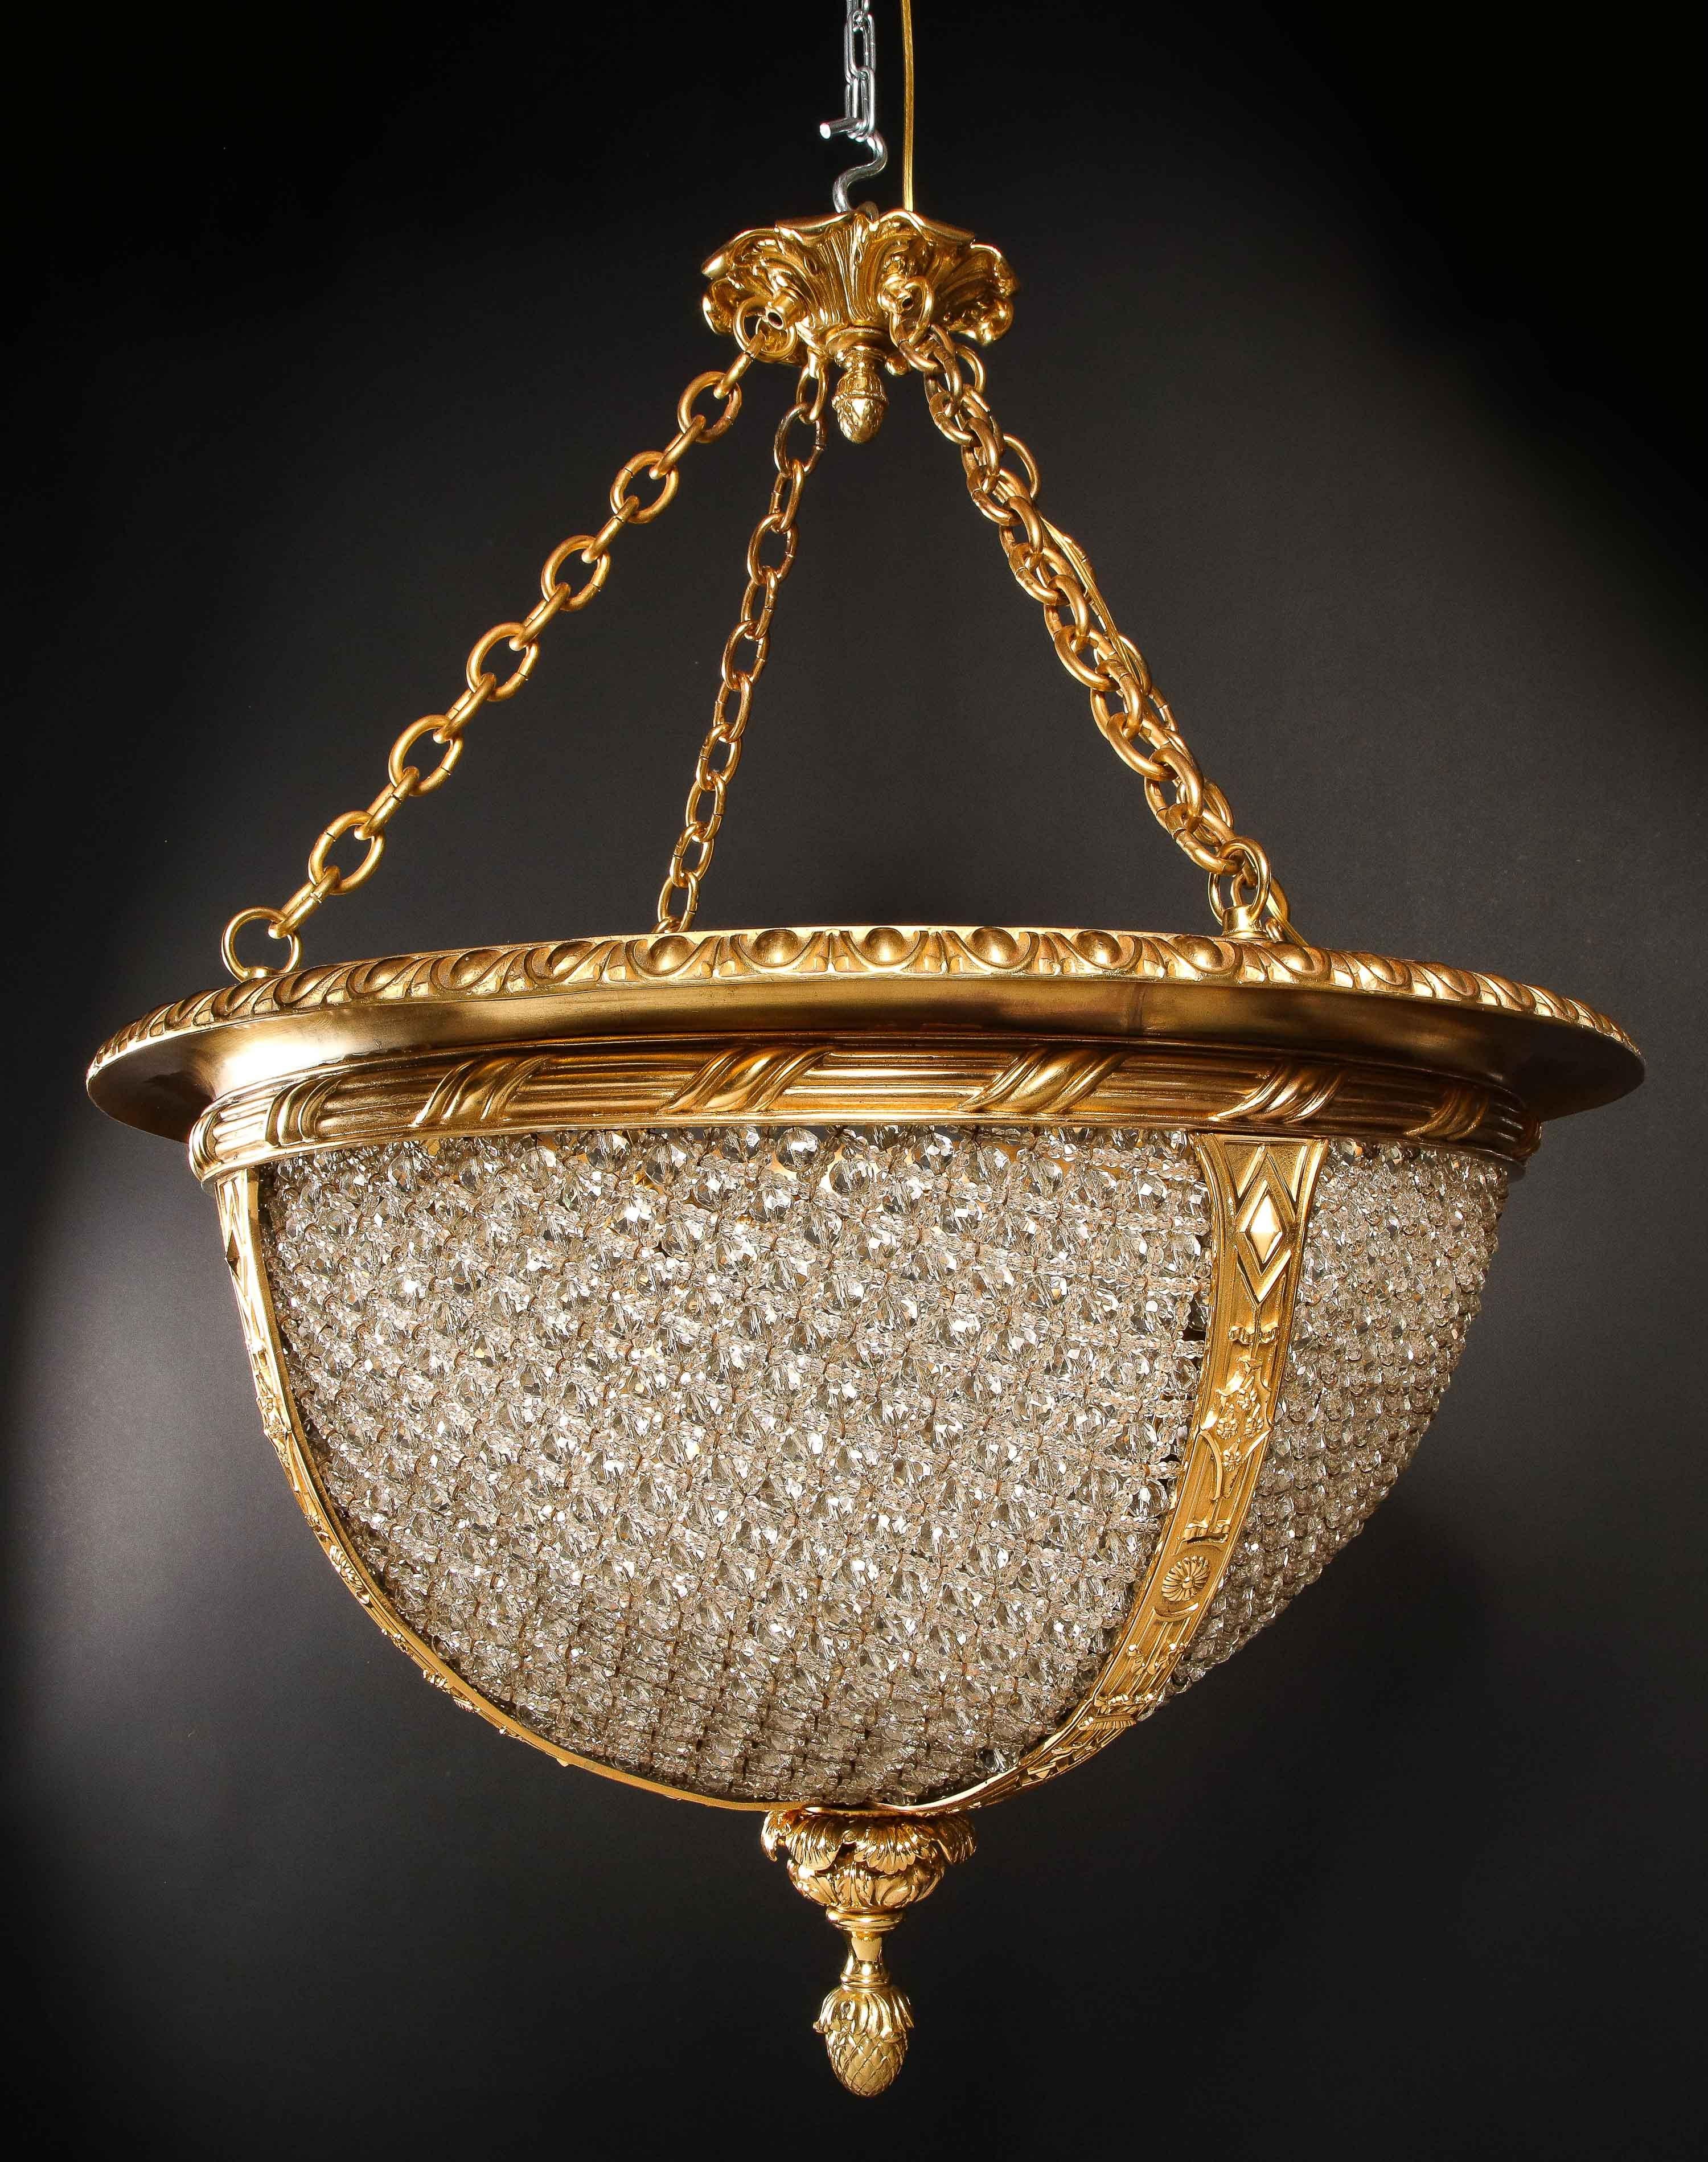 Hollywood Regency Gilt Bronze and beaded glass Circular Chandelier For Sale 9